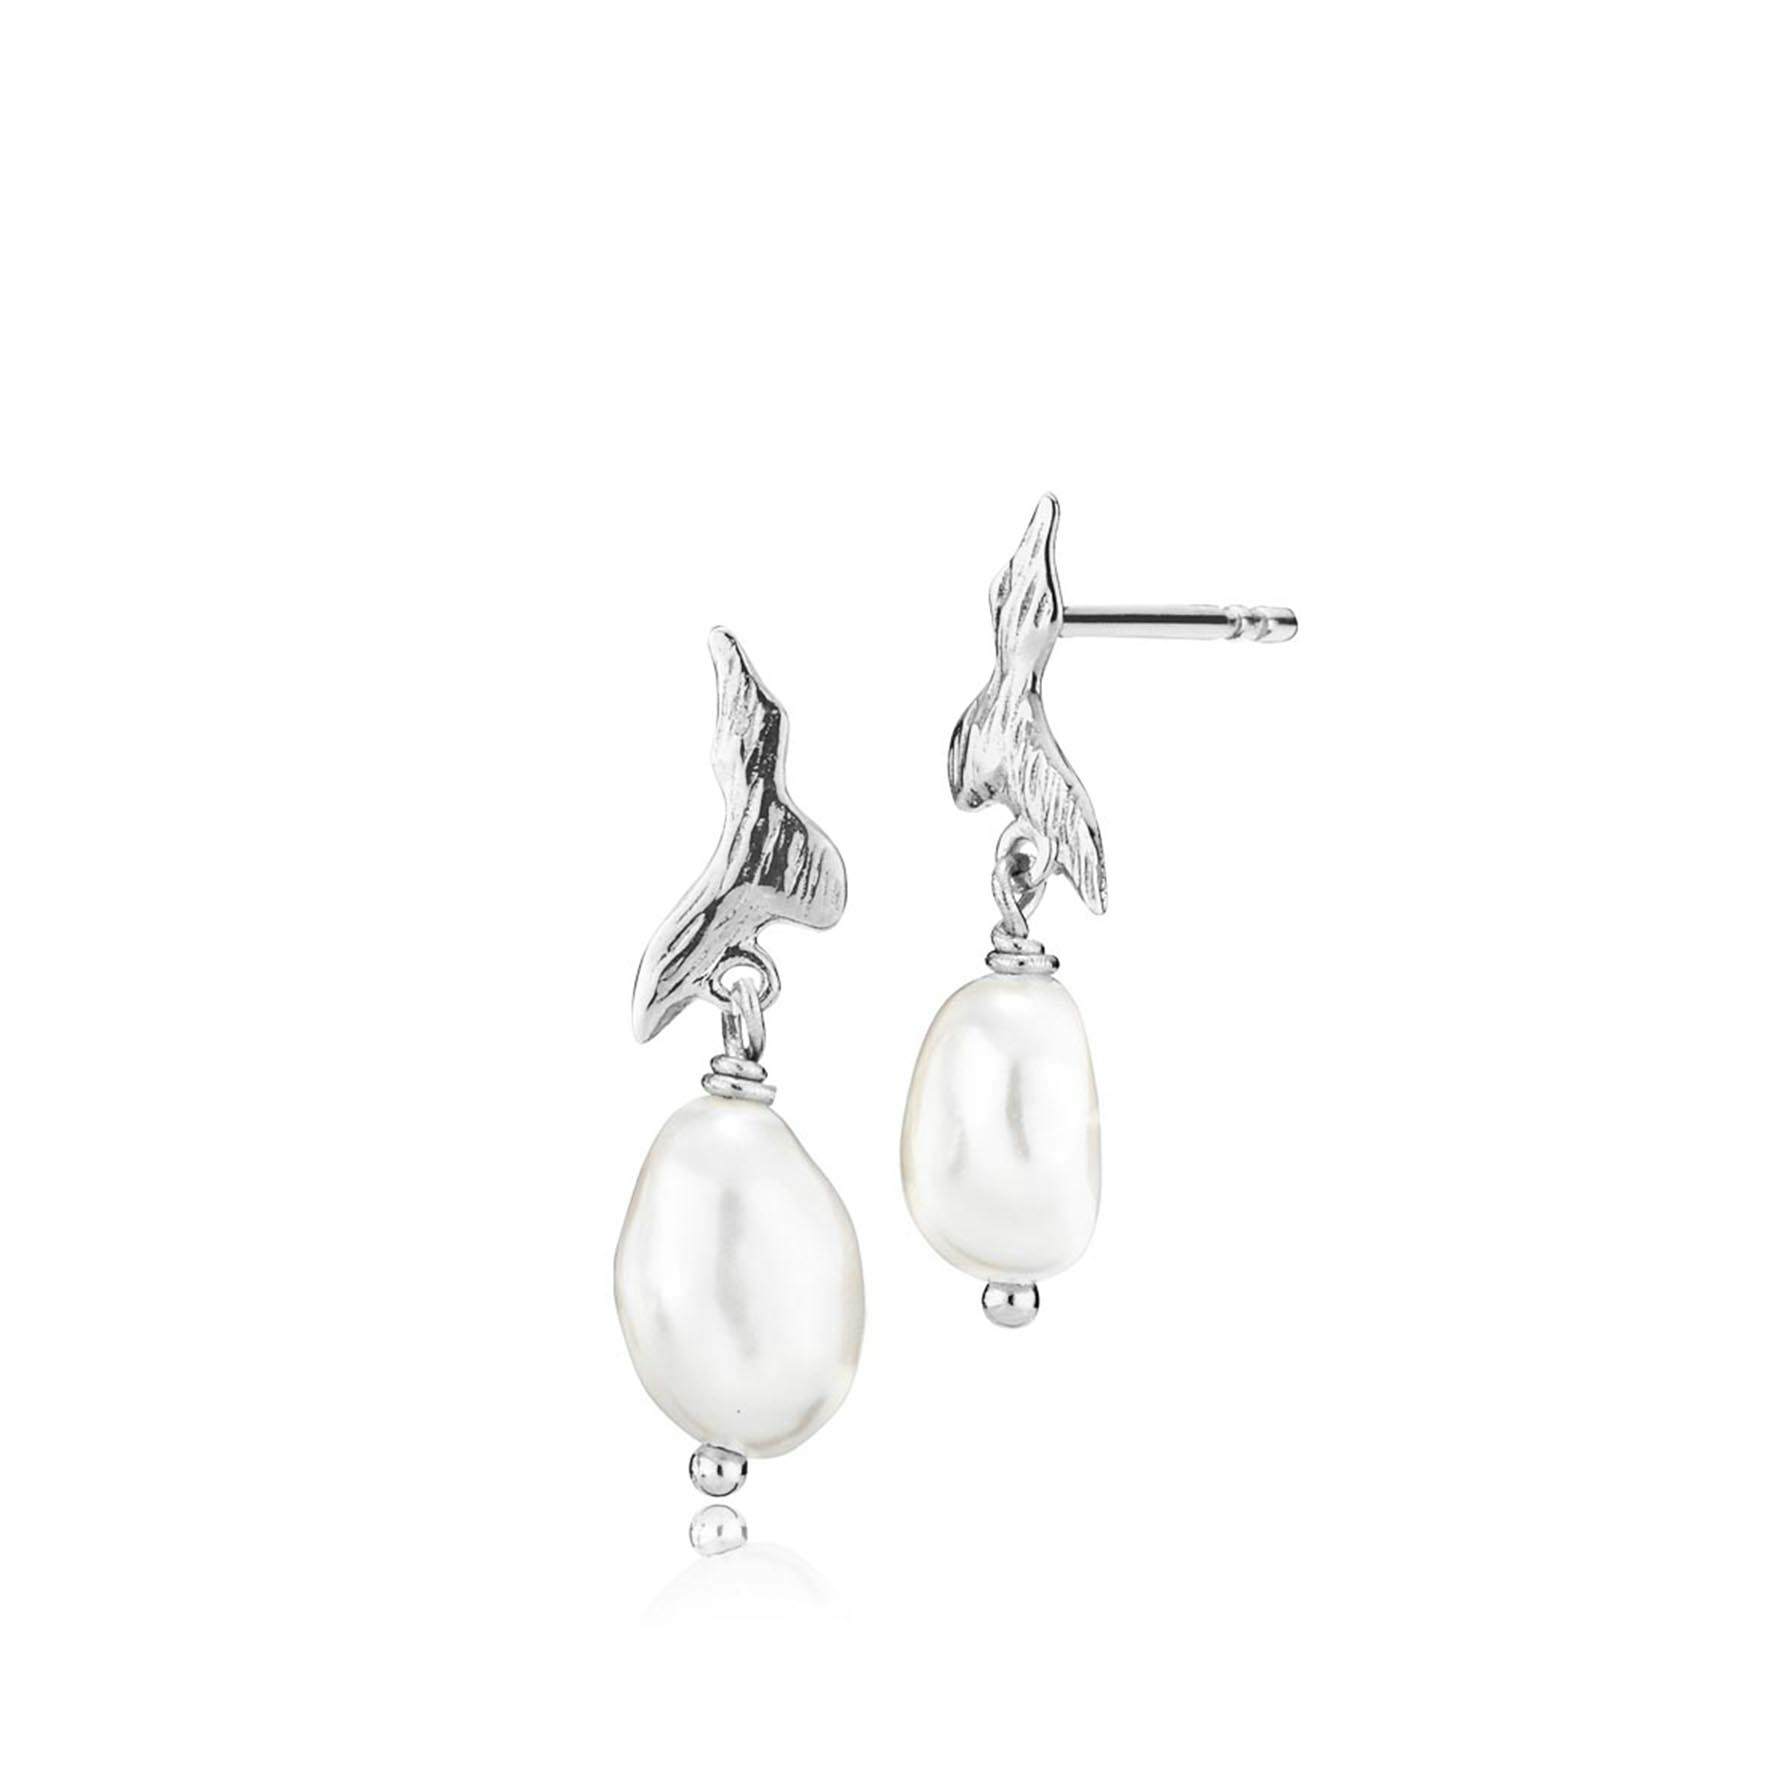 Fairy Earrings With Pearl from Izabel Camille in Silver Sterling 925|Freshwater Pearl